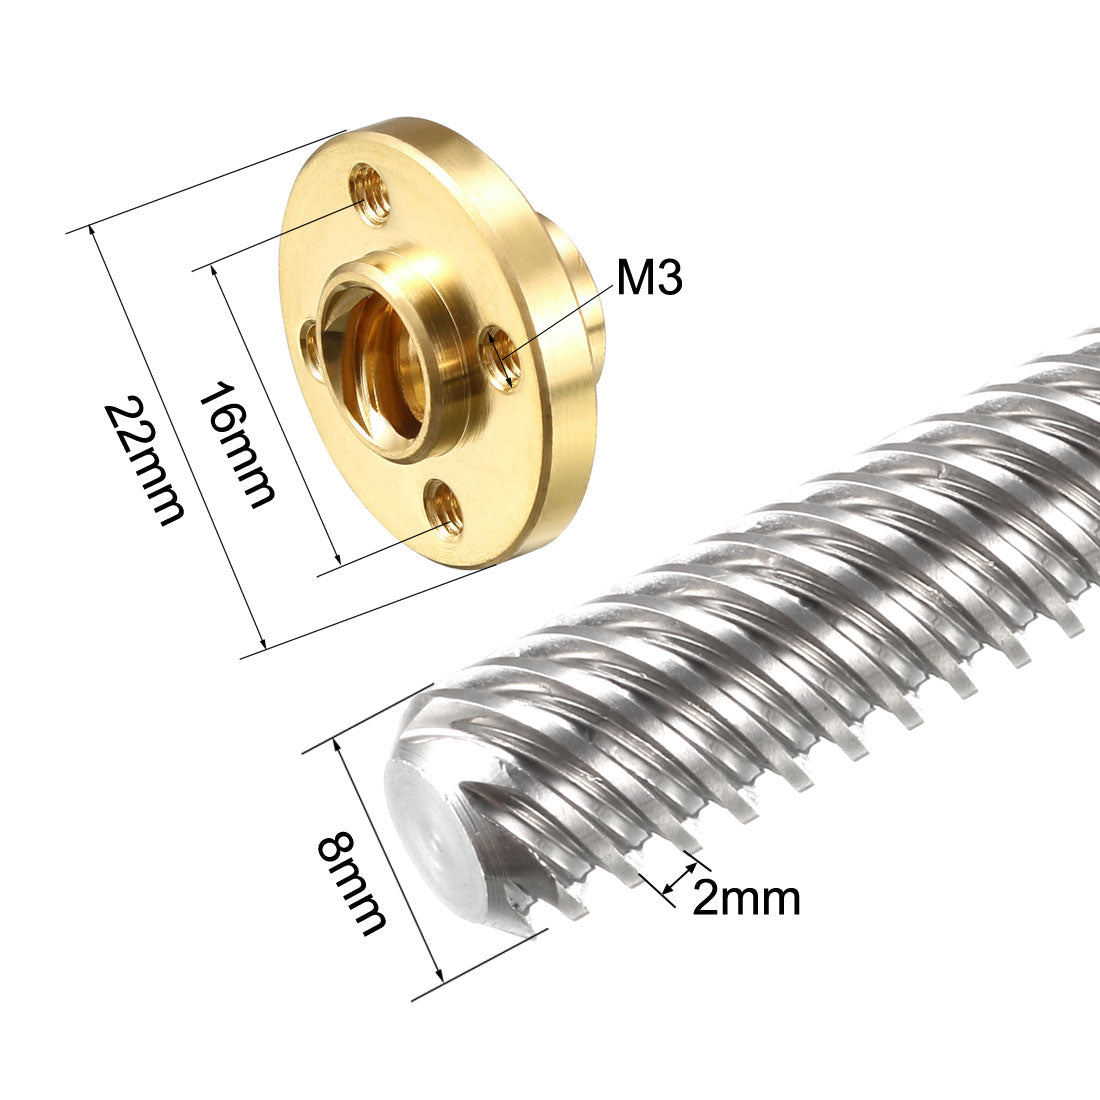 uxcell Uxcell 2PCS 100mm T8 Pitch 2mm Lead 12mm Lead Screw Rod with Copper Nut for 3D Printer